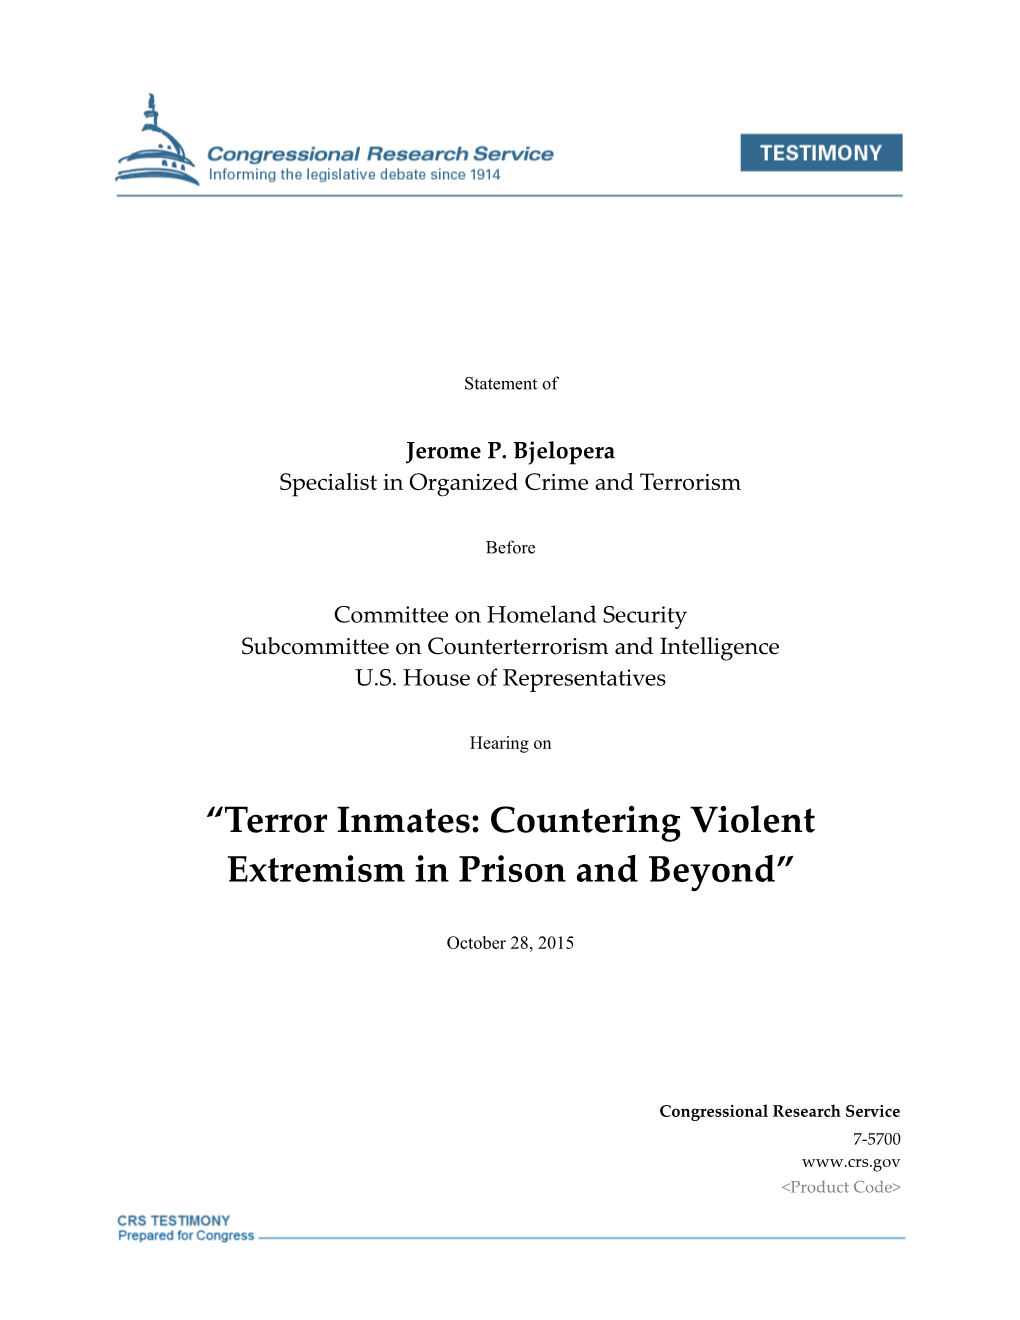 “Terror Inmates: Countering Violent Extremism in Prison and Beyond”